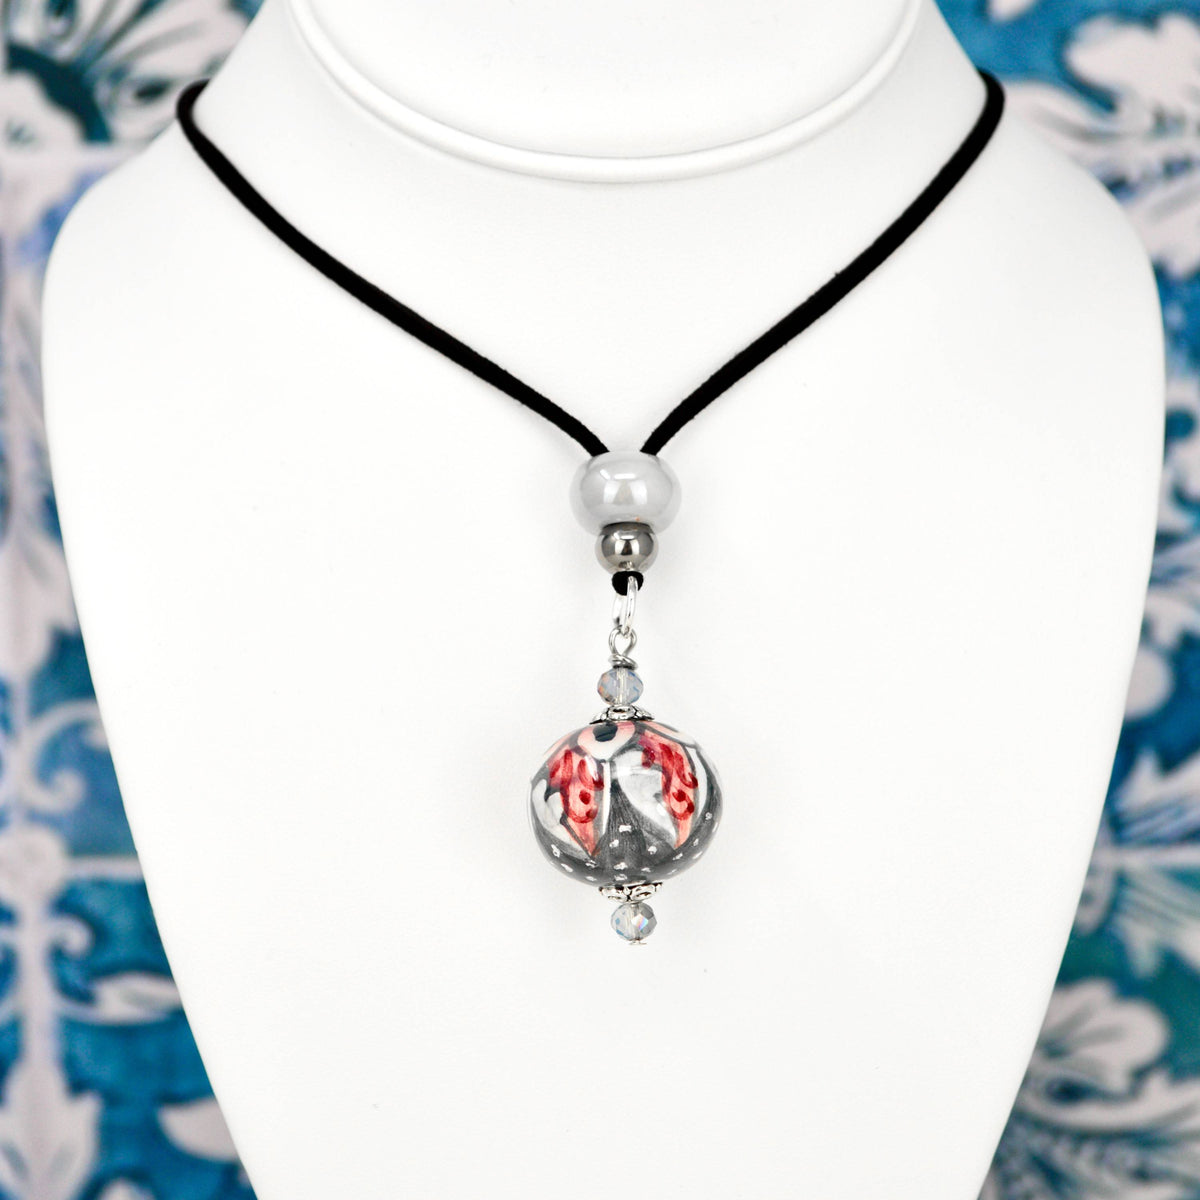 Italian Ceramic Diana Necklace, Red and Grey, Hand-Crafted In Italy - My Italian Decor